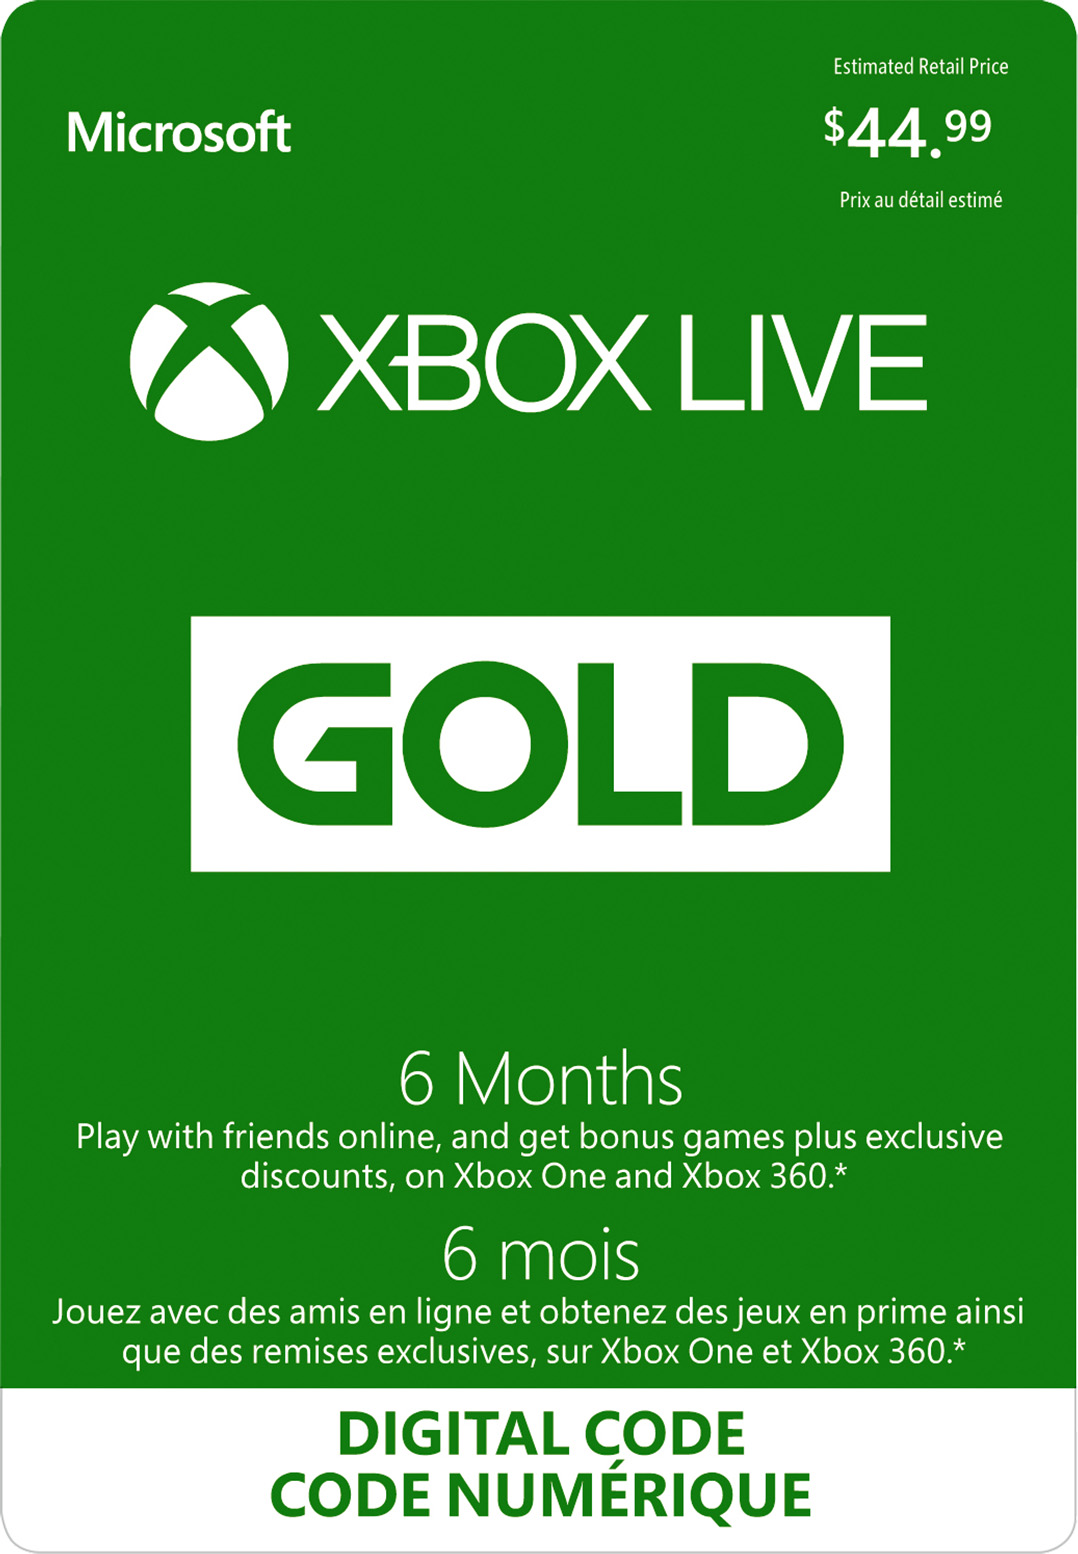 cheapest place to buy xbox live